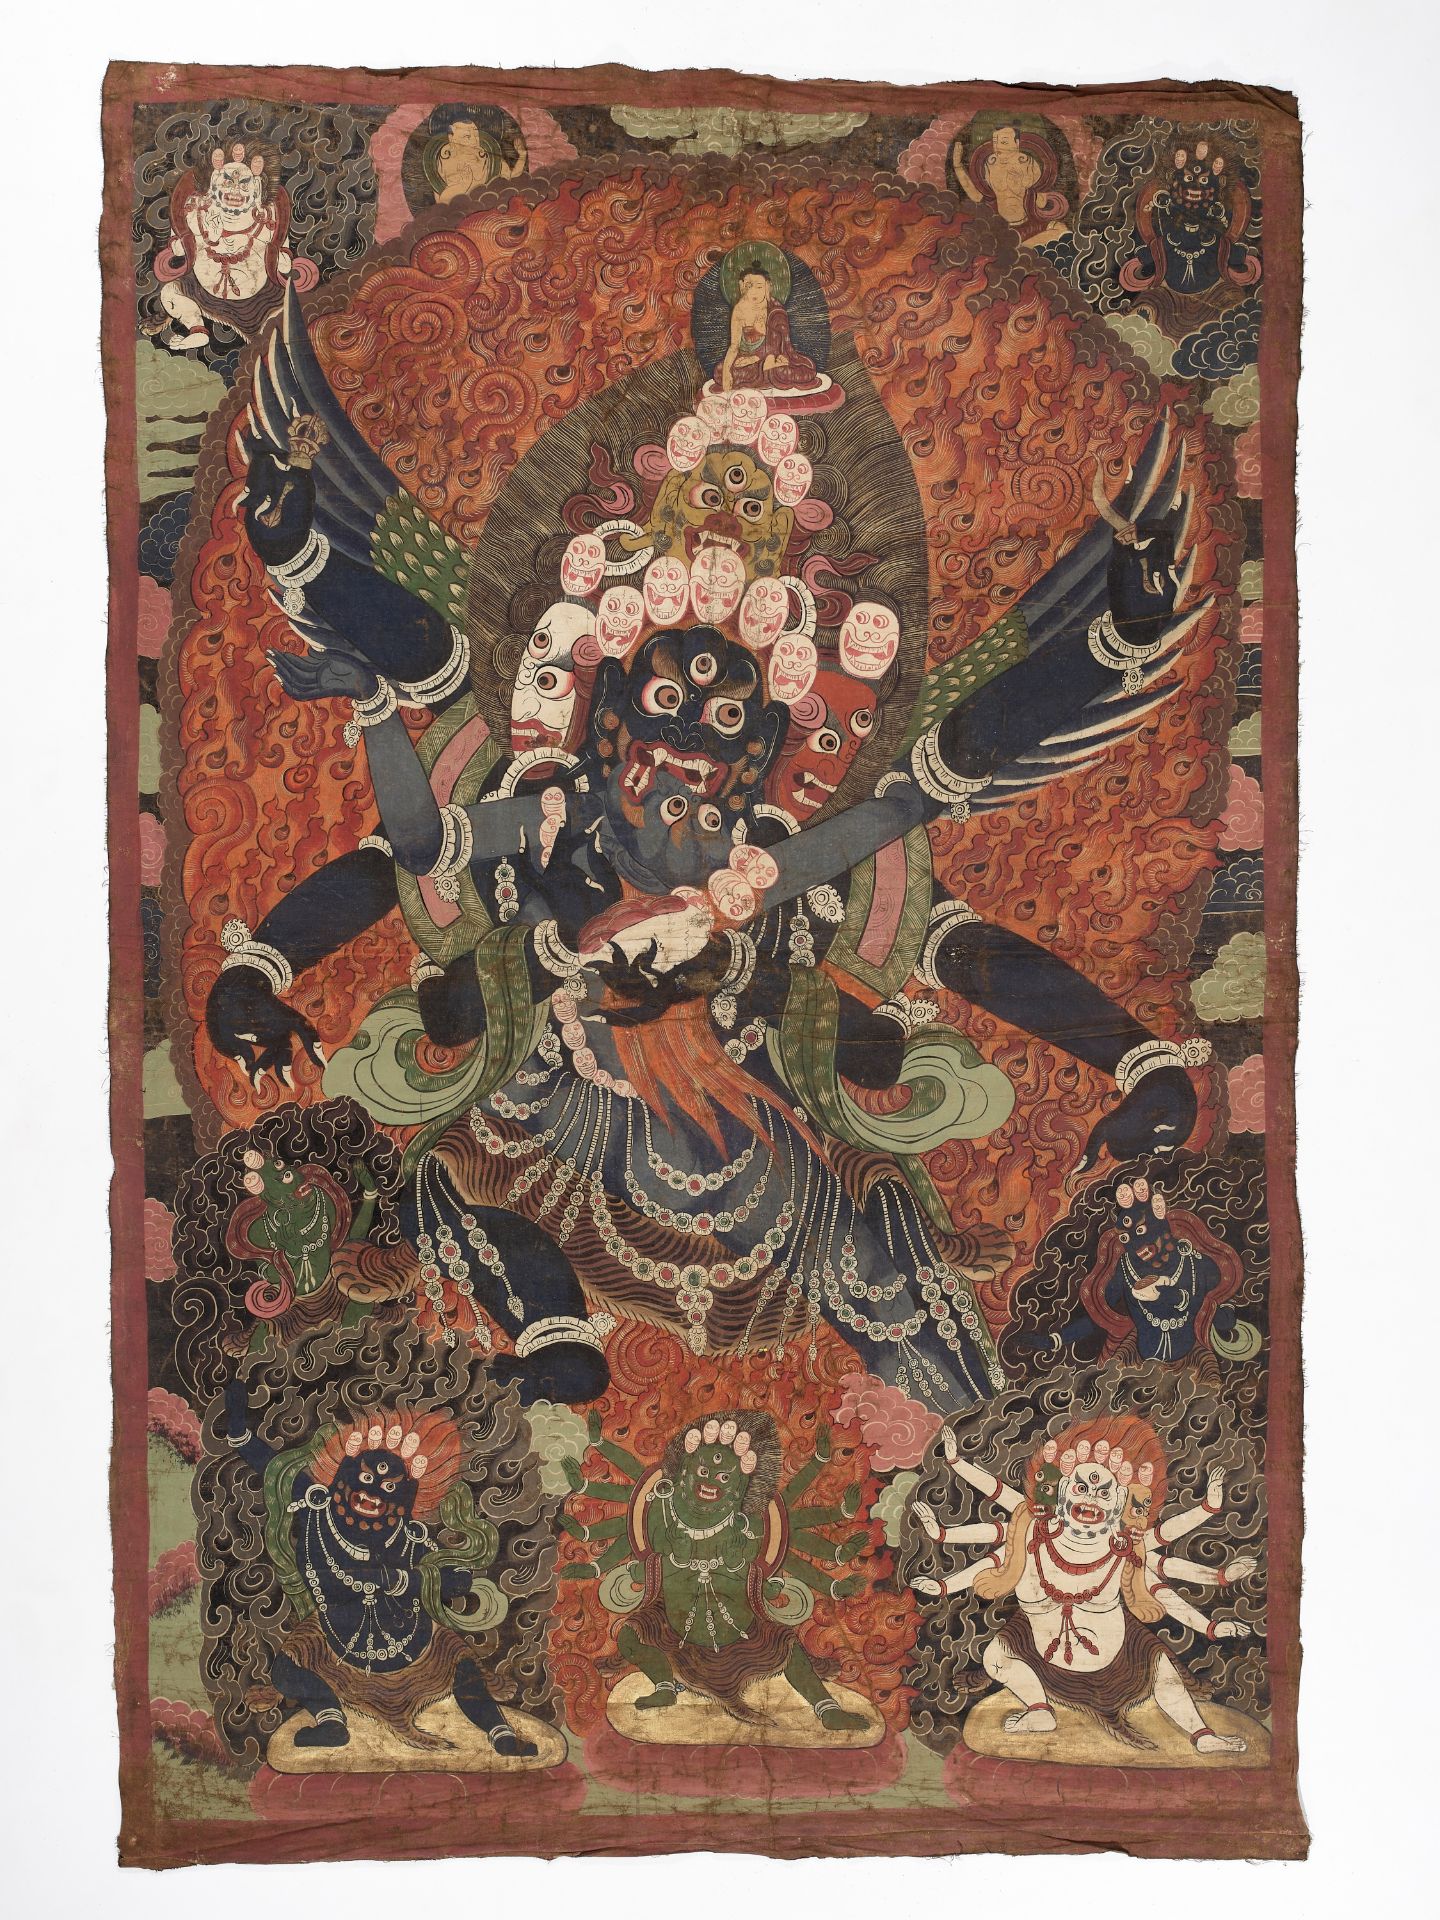 A VERY LARGE THANGKA OF A HERUKA AND CONSORT, TIBET, 18TH-19TH CENTURY - Image 2 of 7